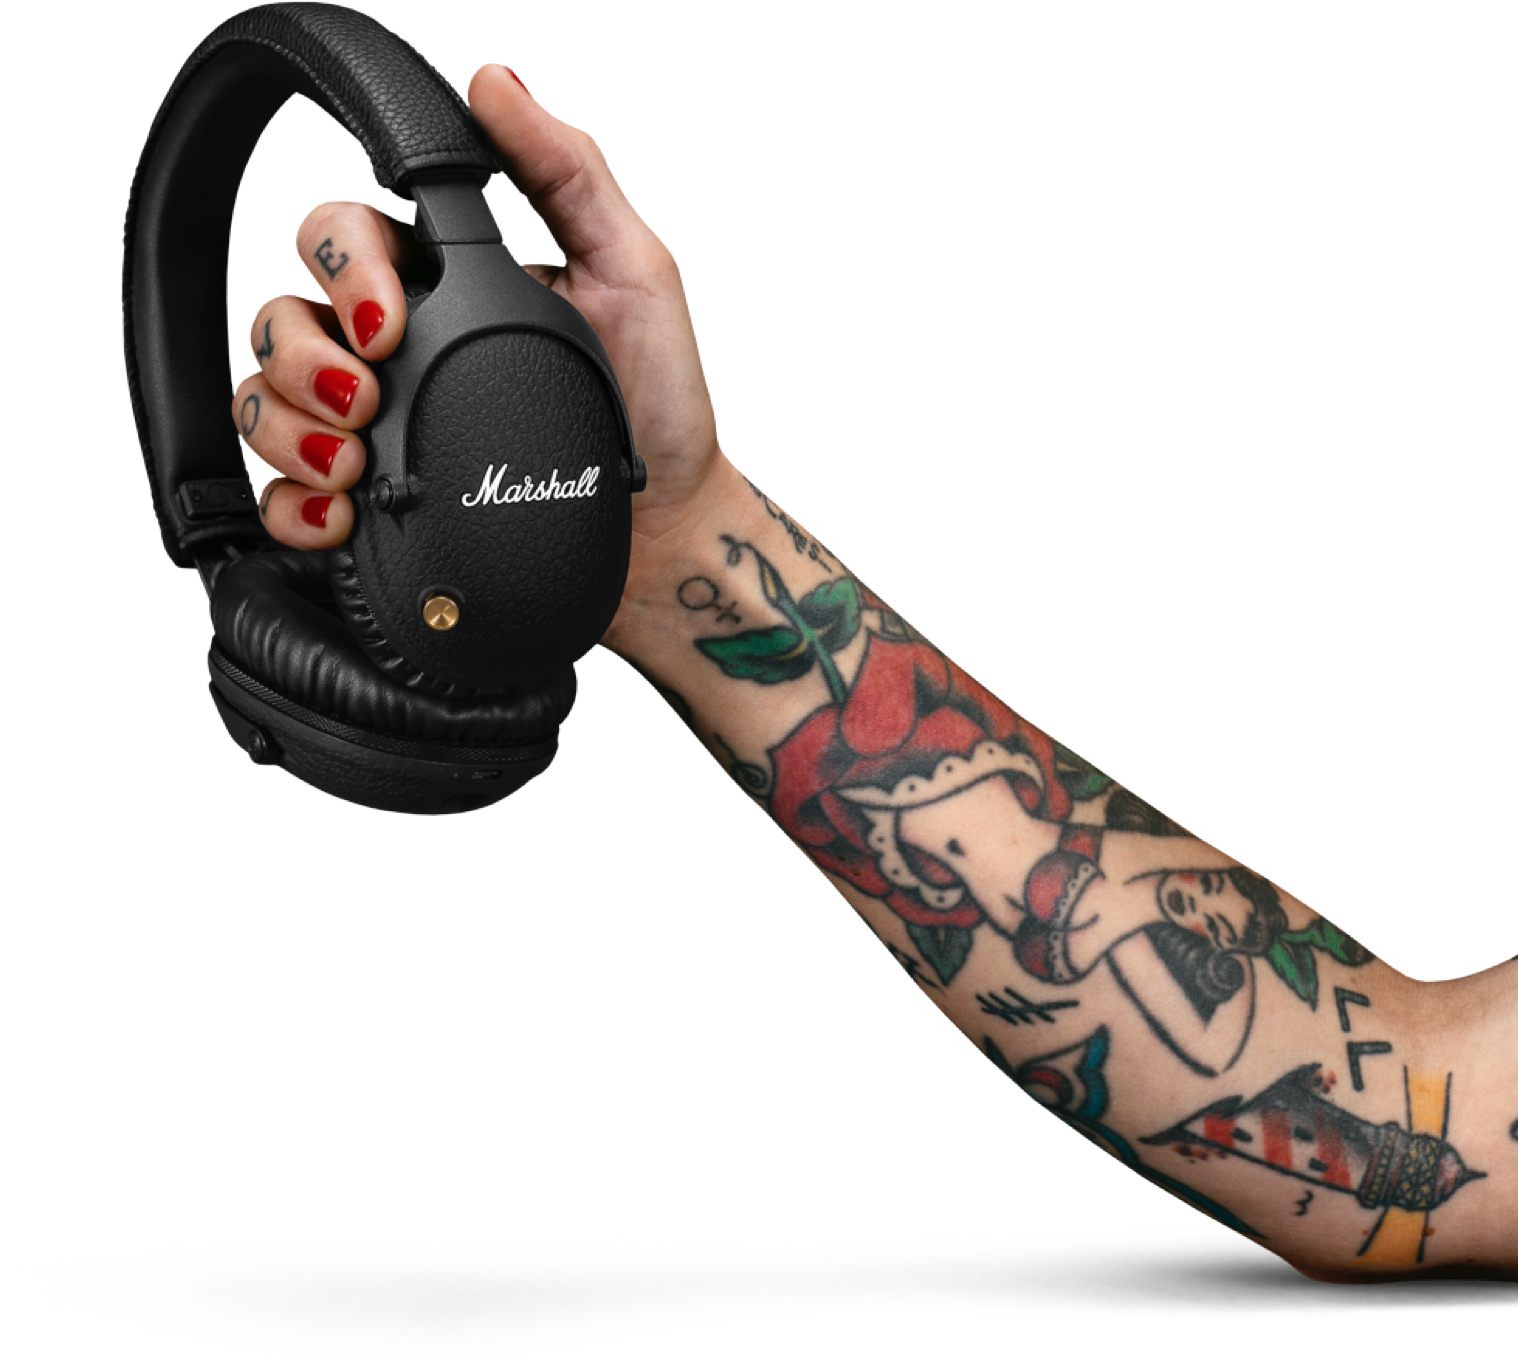 Marshall’s new headphones join the premium noise-cancellation game with their Monitor II ANC